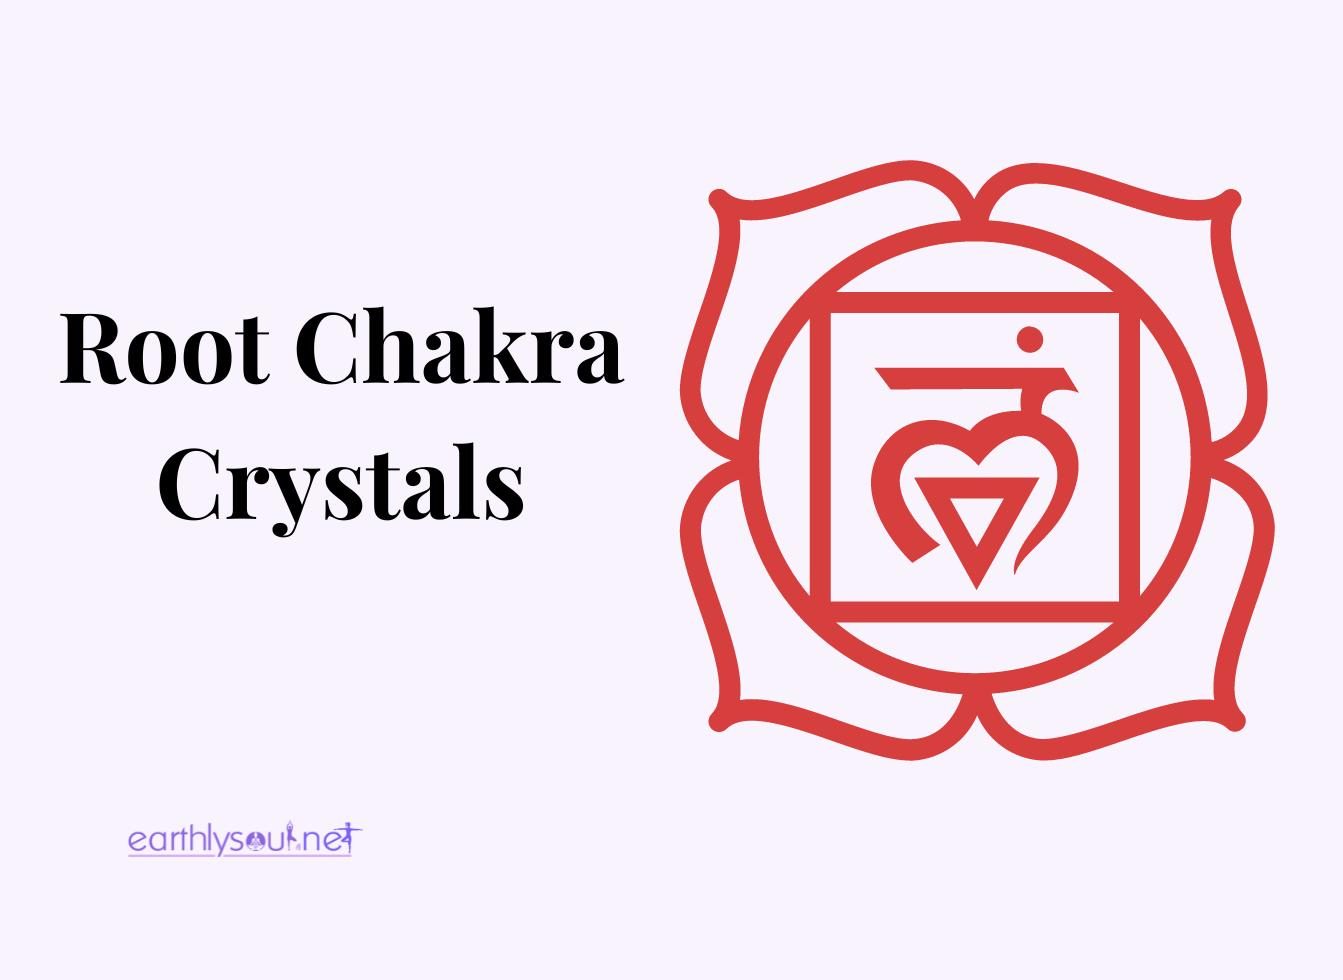 Root chakra crystals featured image